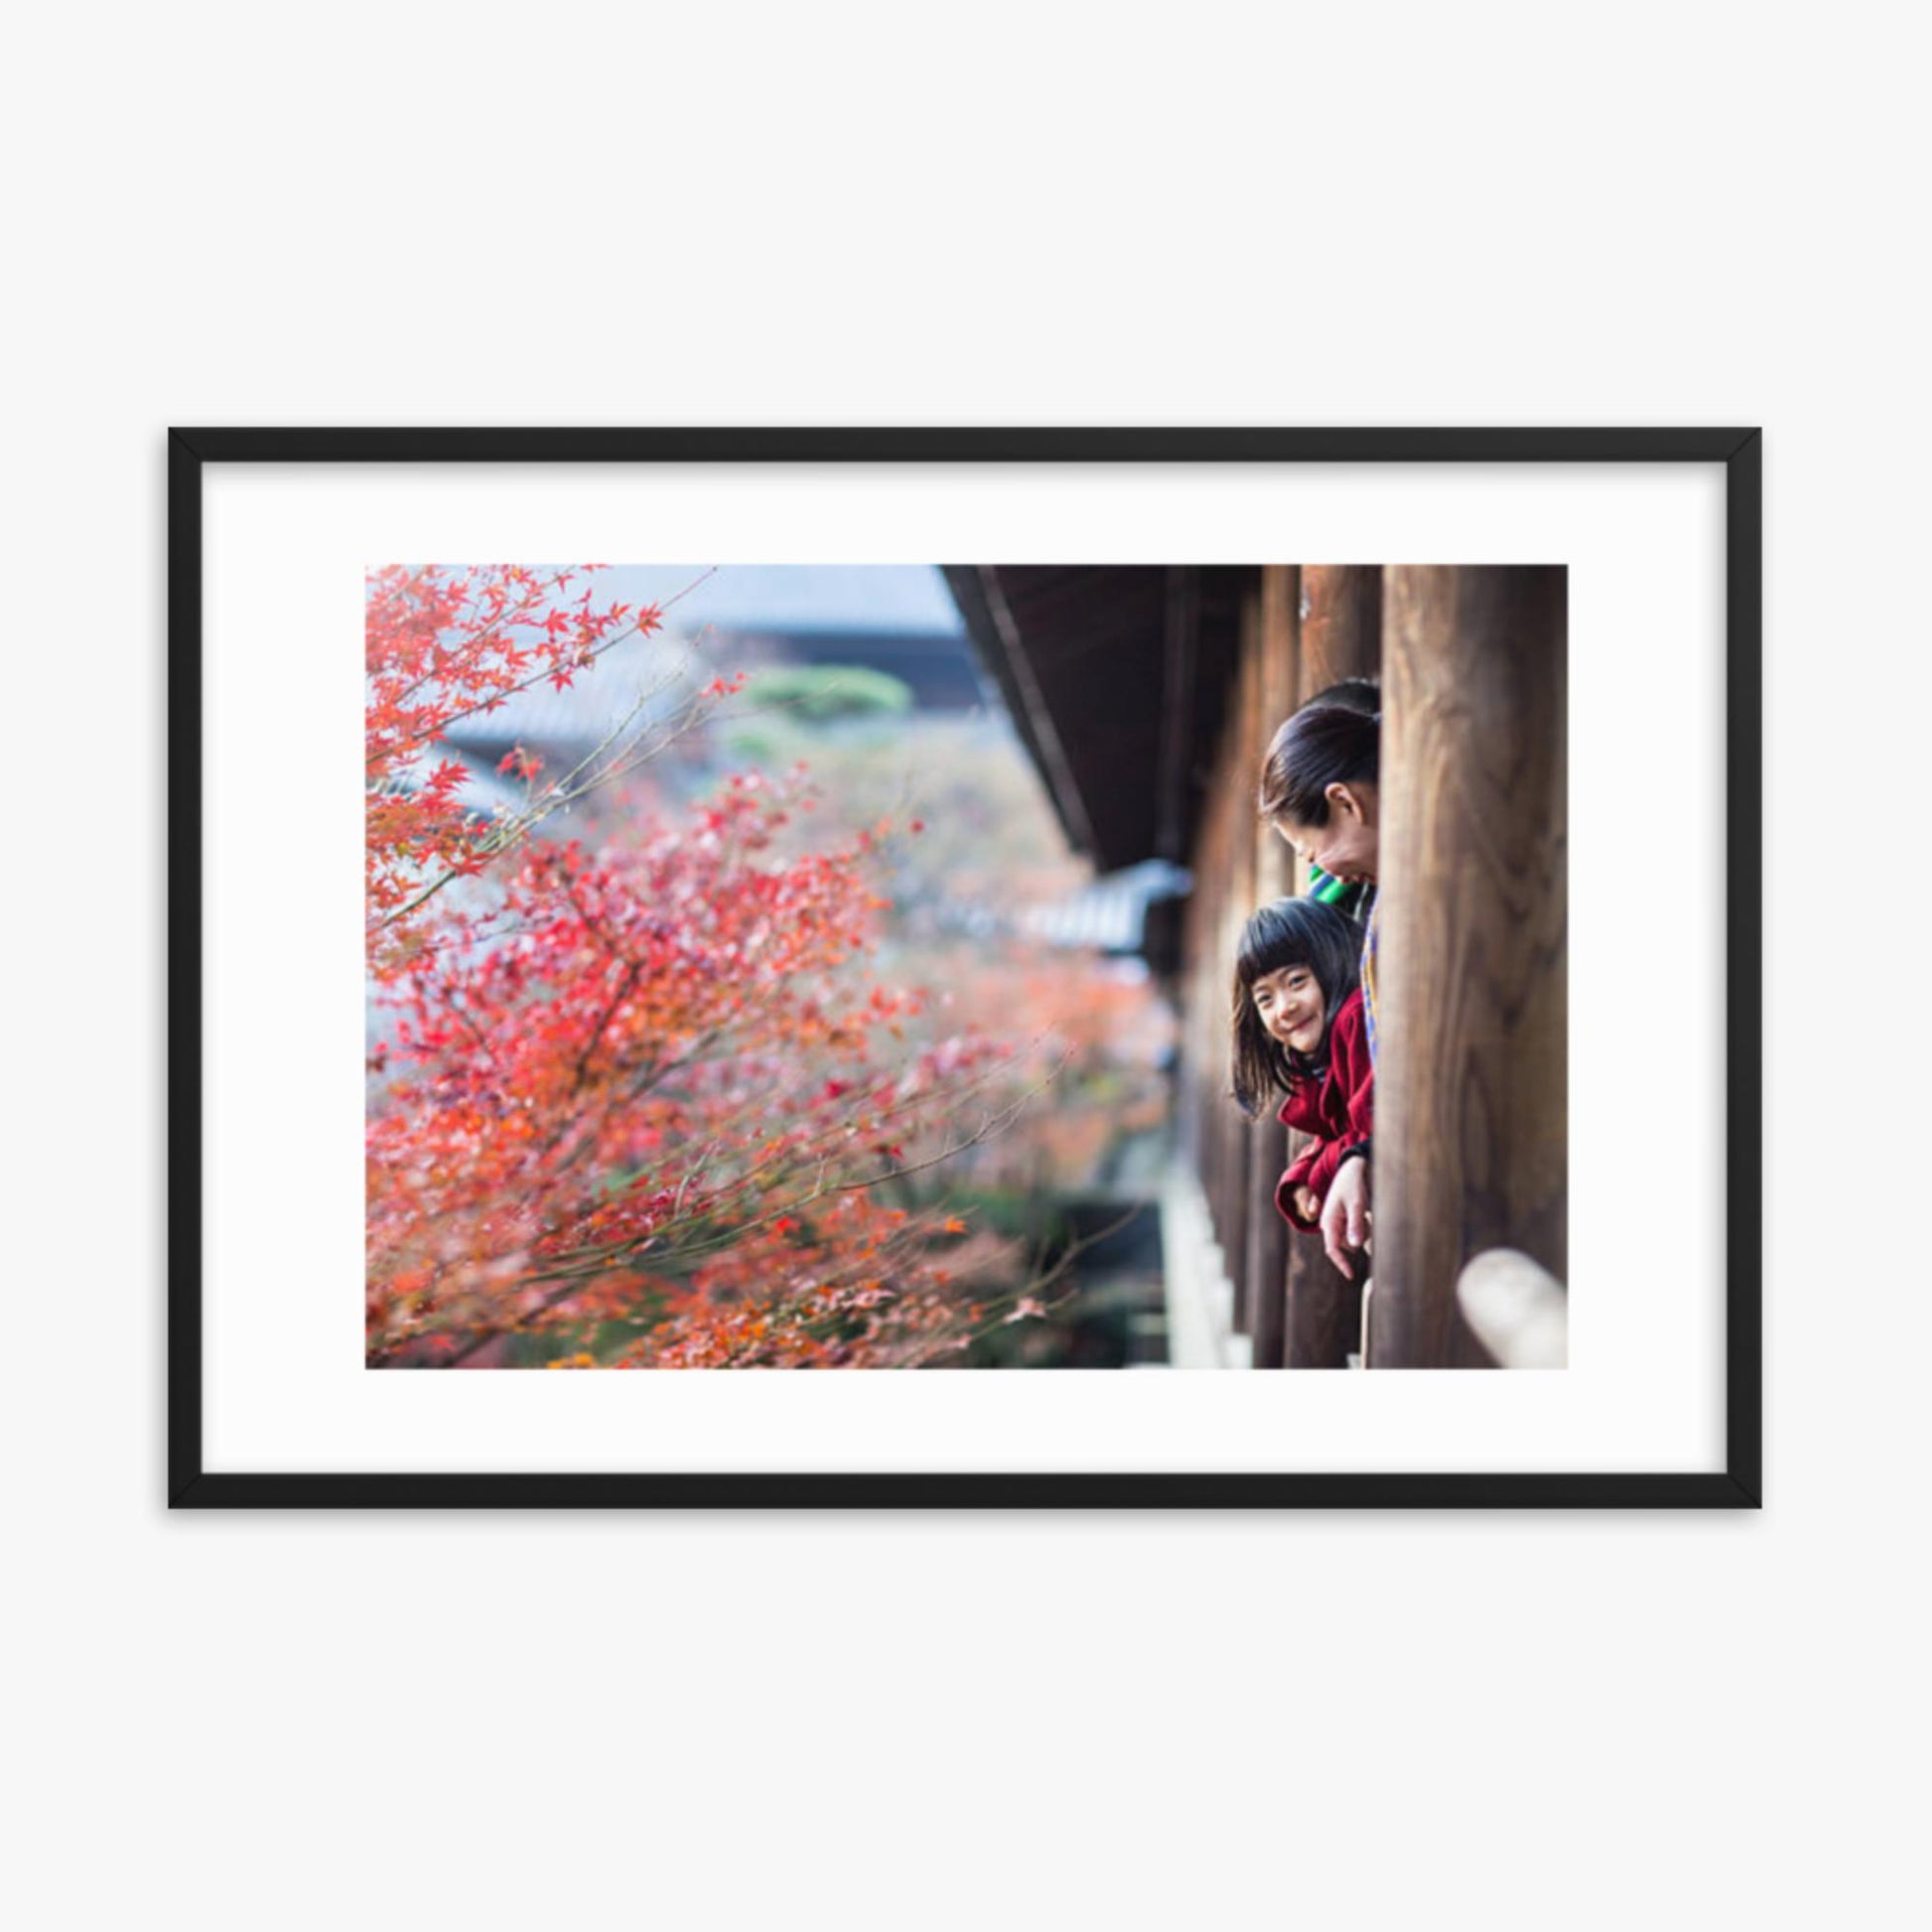 Father, mother and daughter at a temple enjoying autumn leaves 24x36 in Poster With Black Frame